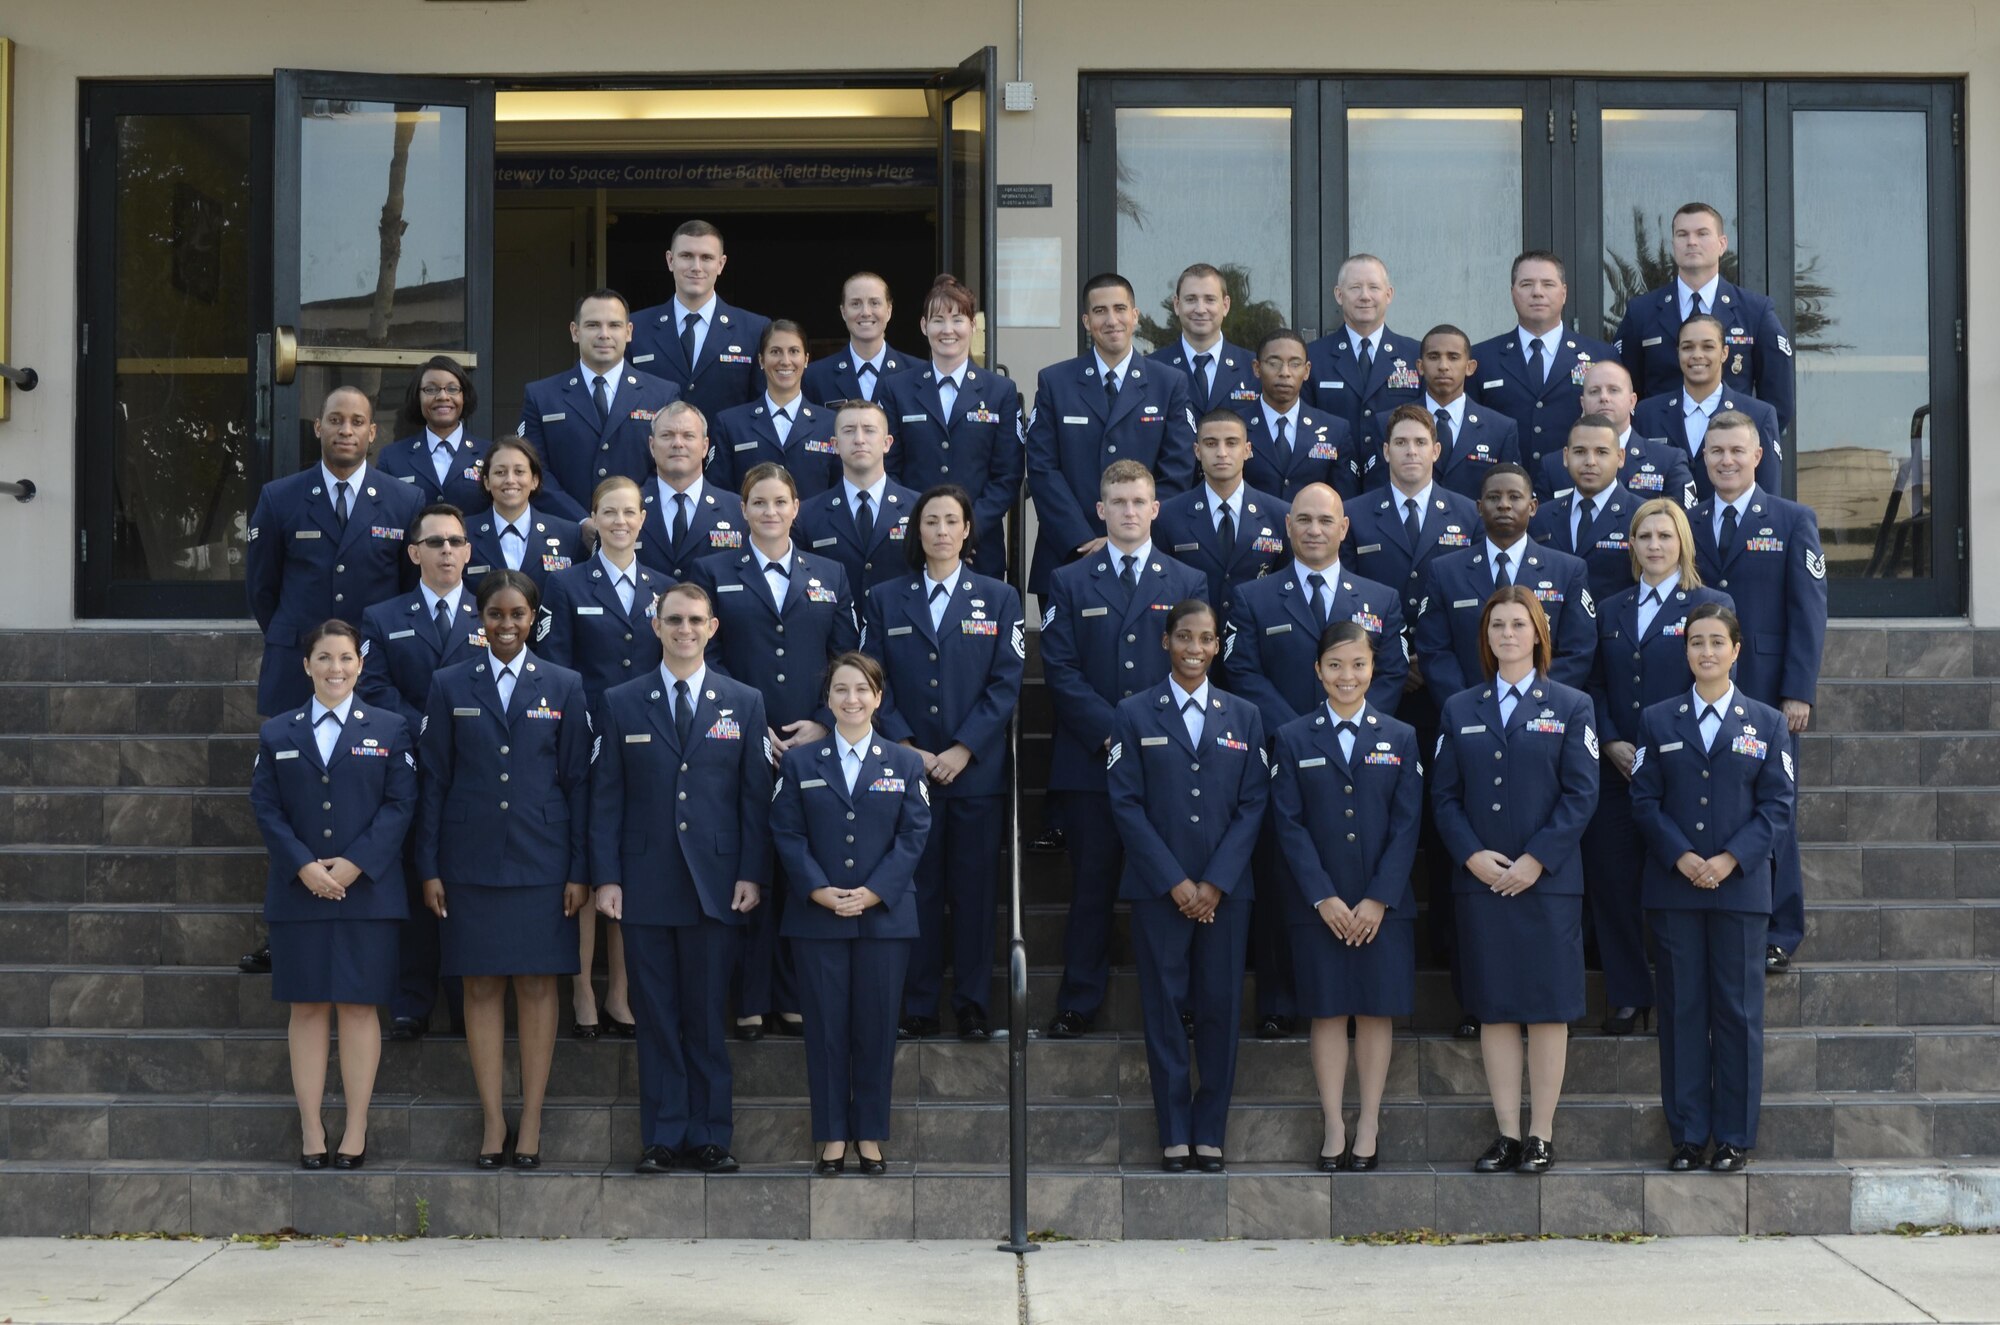 Forty three Reserve Airmen from the 920th Rescue Wing graduated with an associate’s degree from the Community College of the Air Force Dec. 5 in a ceremony at Patrick Air Force Base, Florida. (U.S. Air Force photo/Tech. Sgt. Mike Means) 
